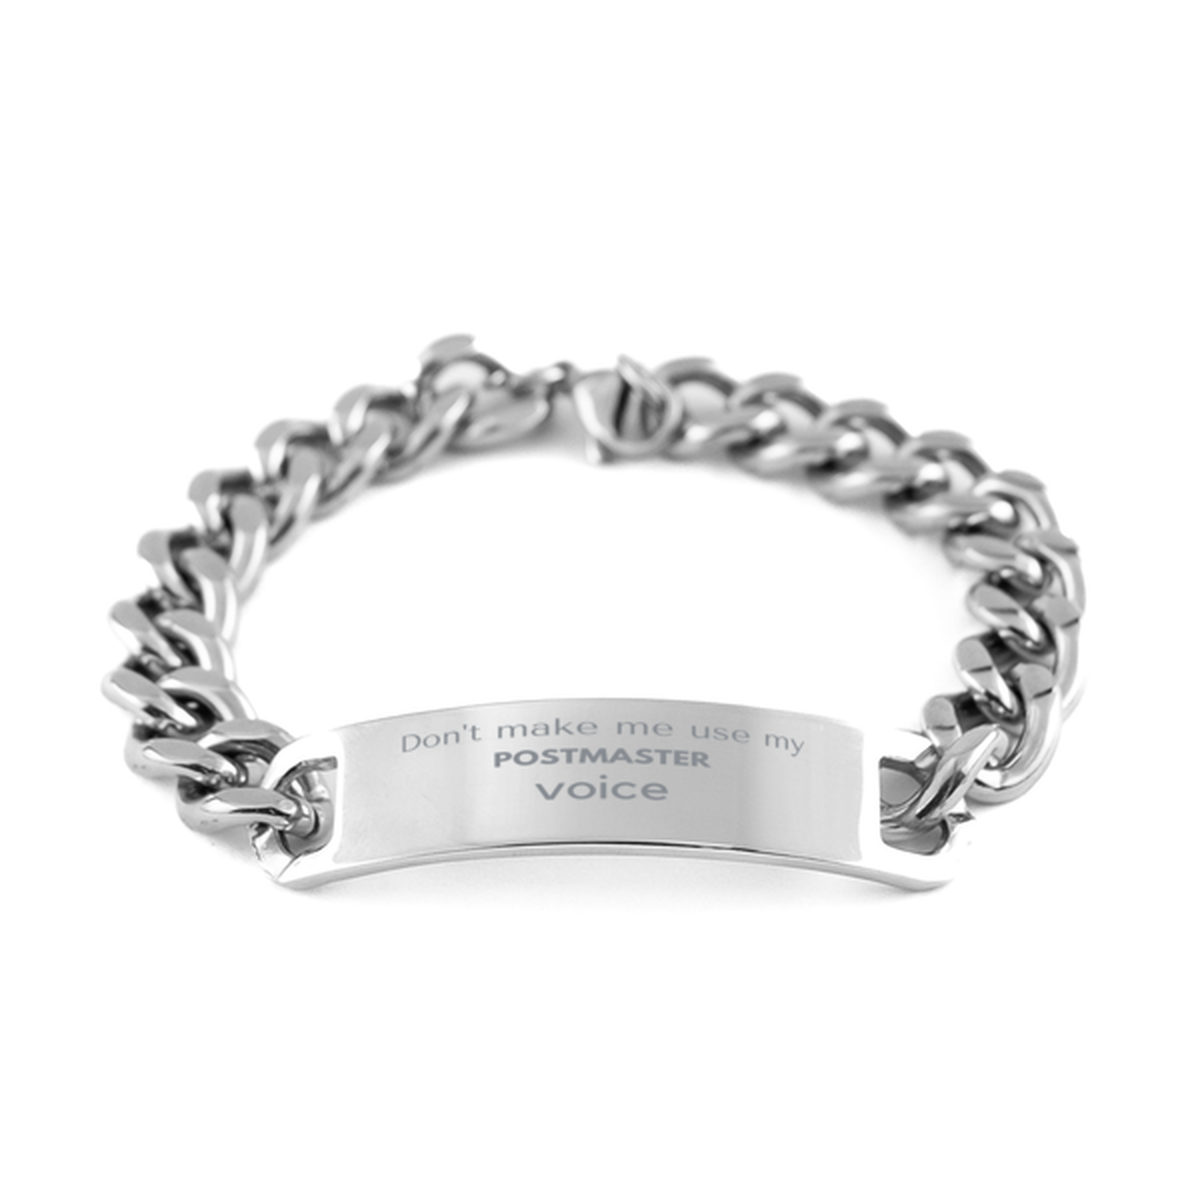 Don't make me use my Postmaster voice, Sarcasm Postmaster Gifts, Christmas Postmaster Cuban Chain Stainless Steel Bracelet Birthday Unique Gifts For Postmaster Coworkers, Men, Women, Colleague, Friends